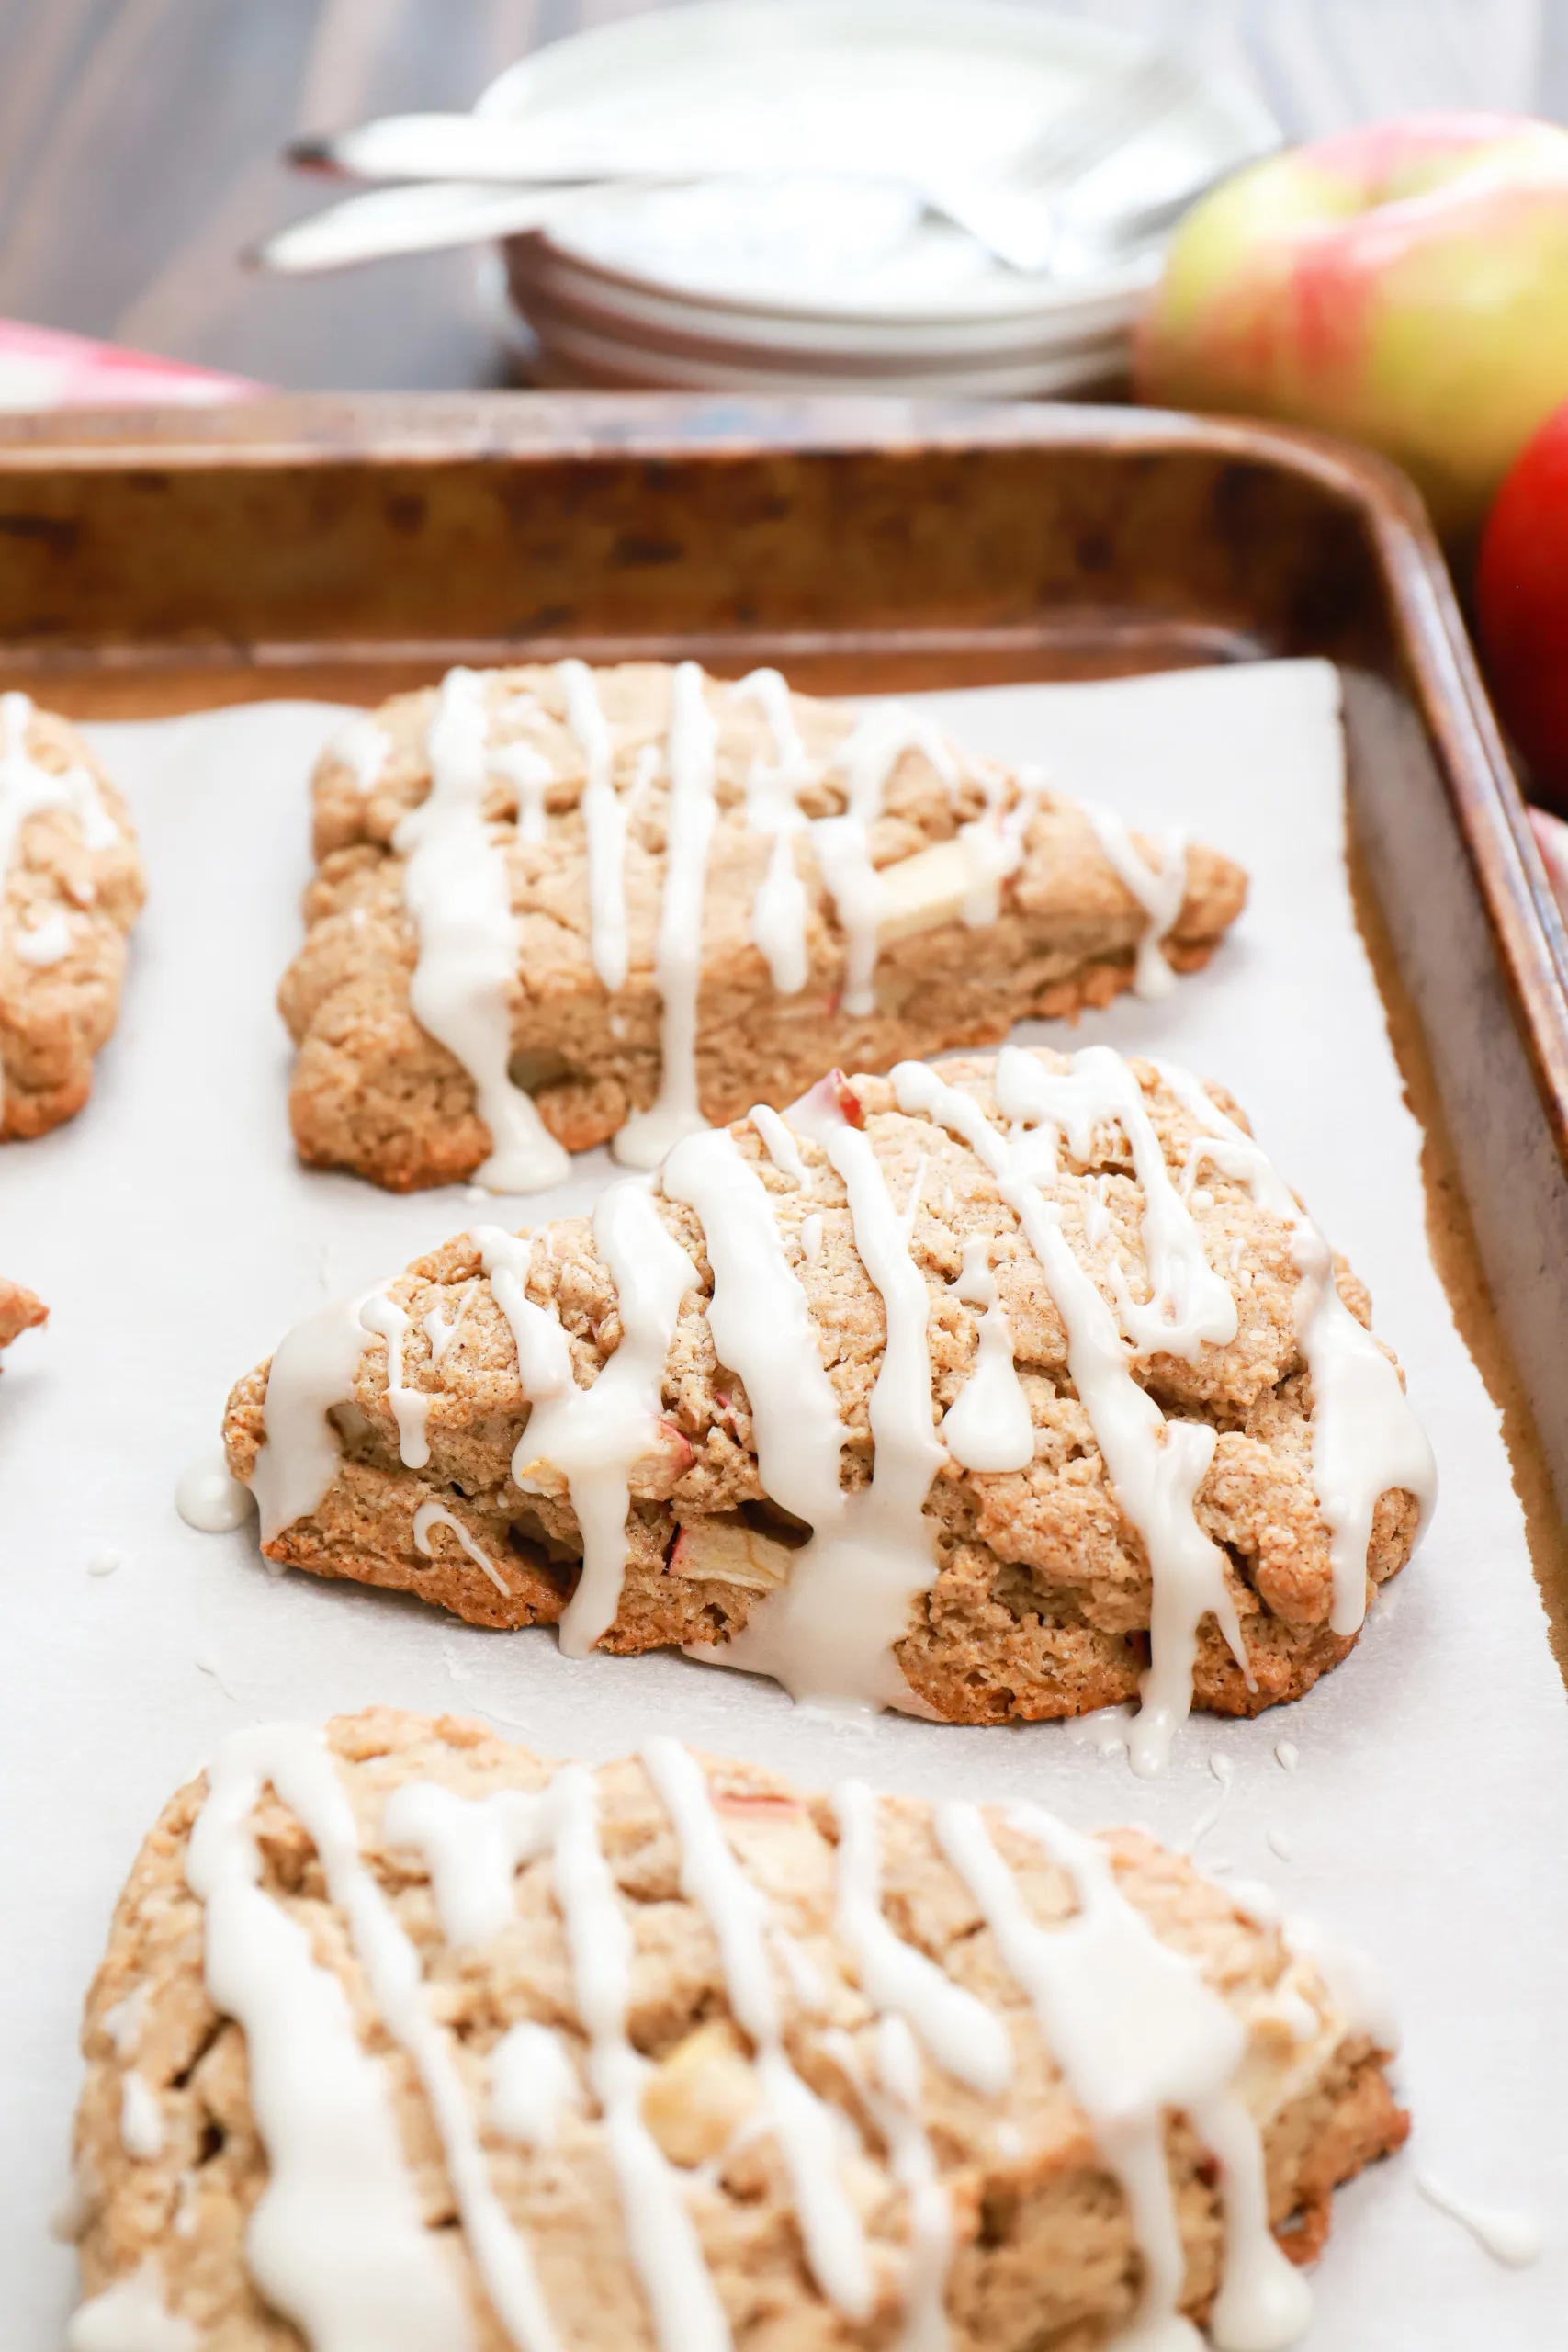 Up close side view of an apple cinnamon scone on a parchment paper lined baking sheet.